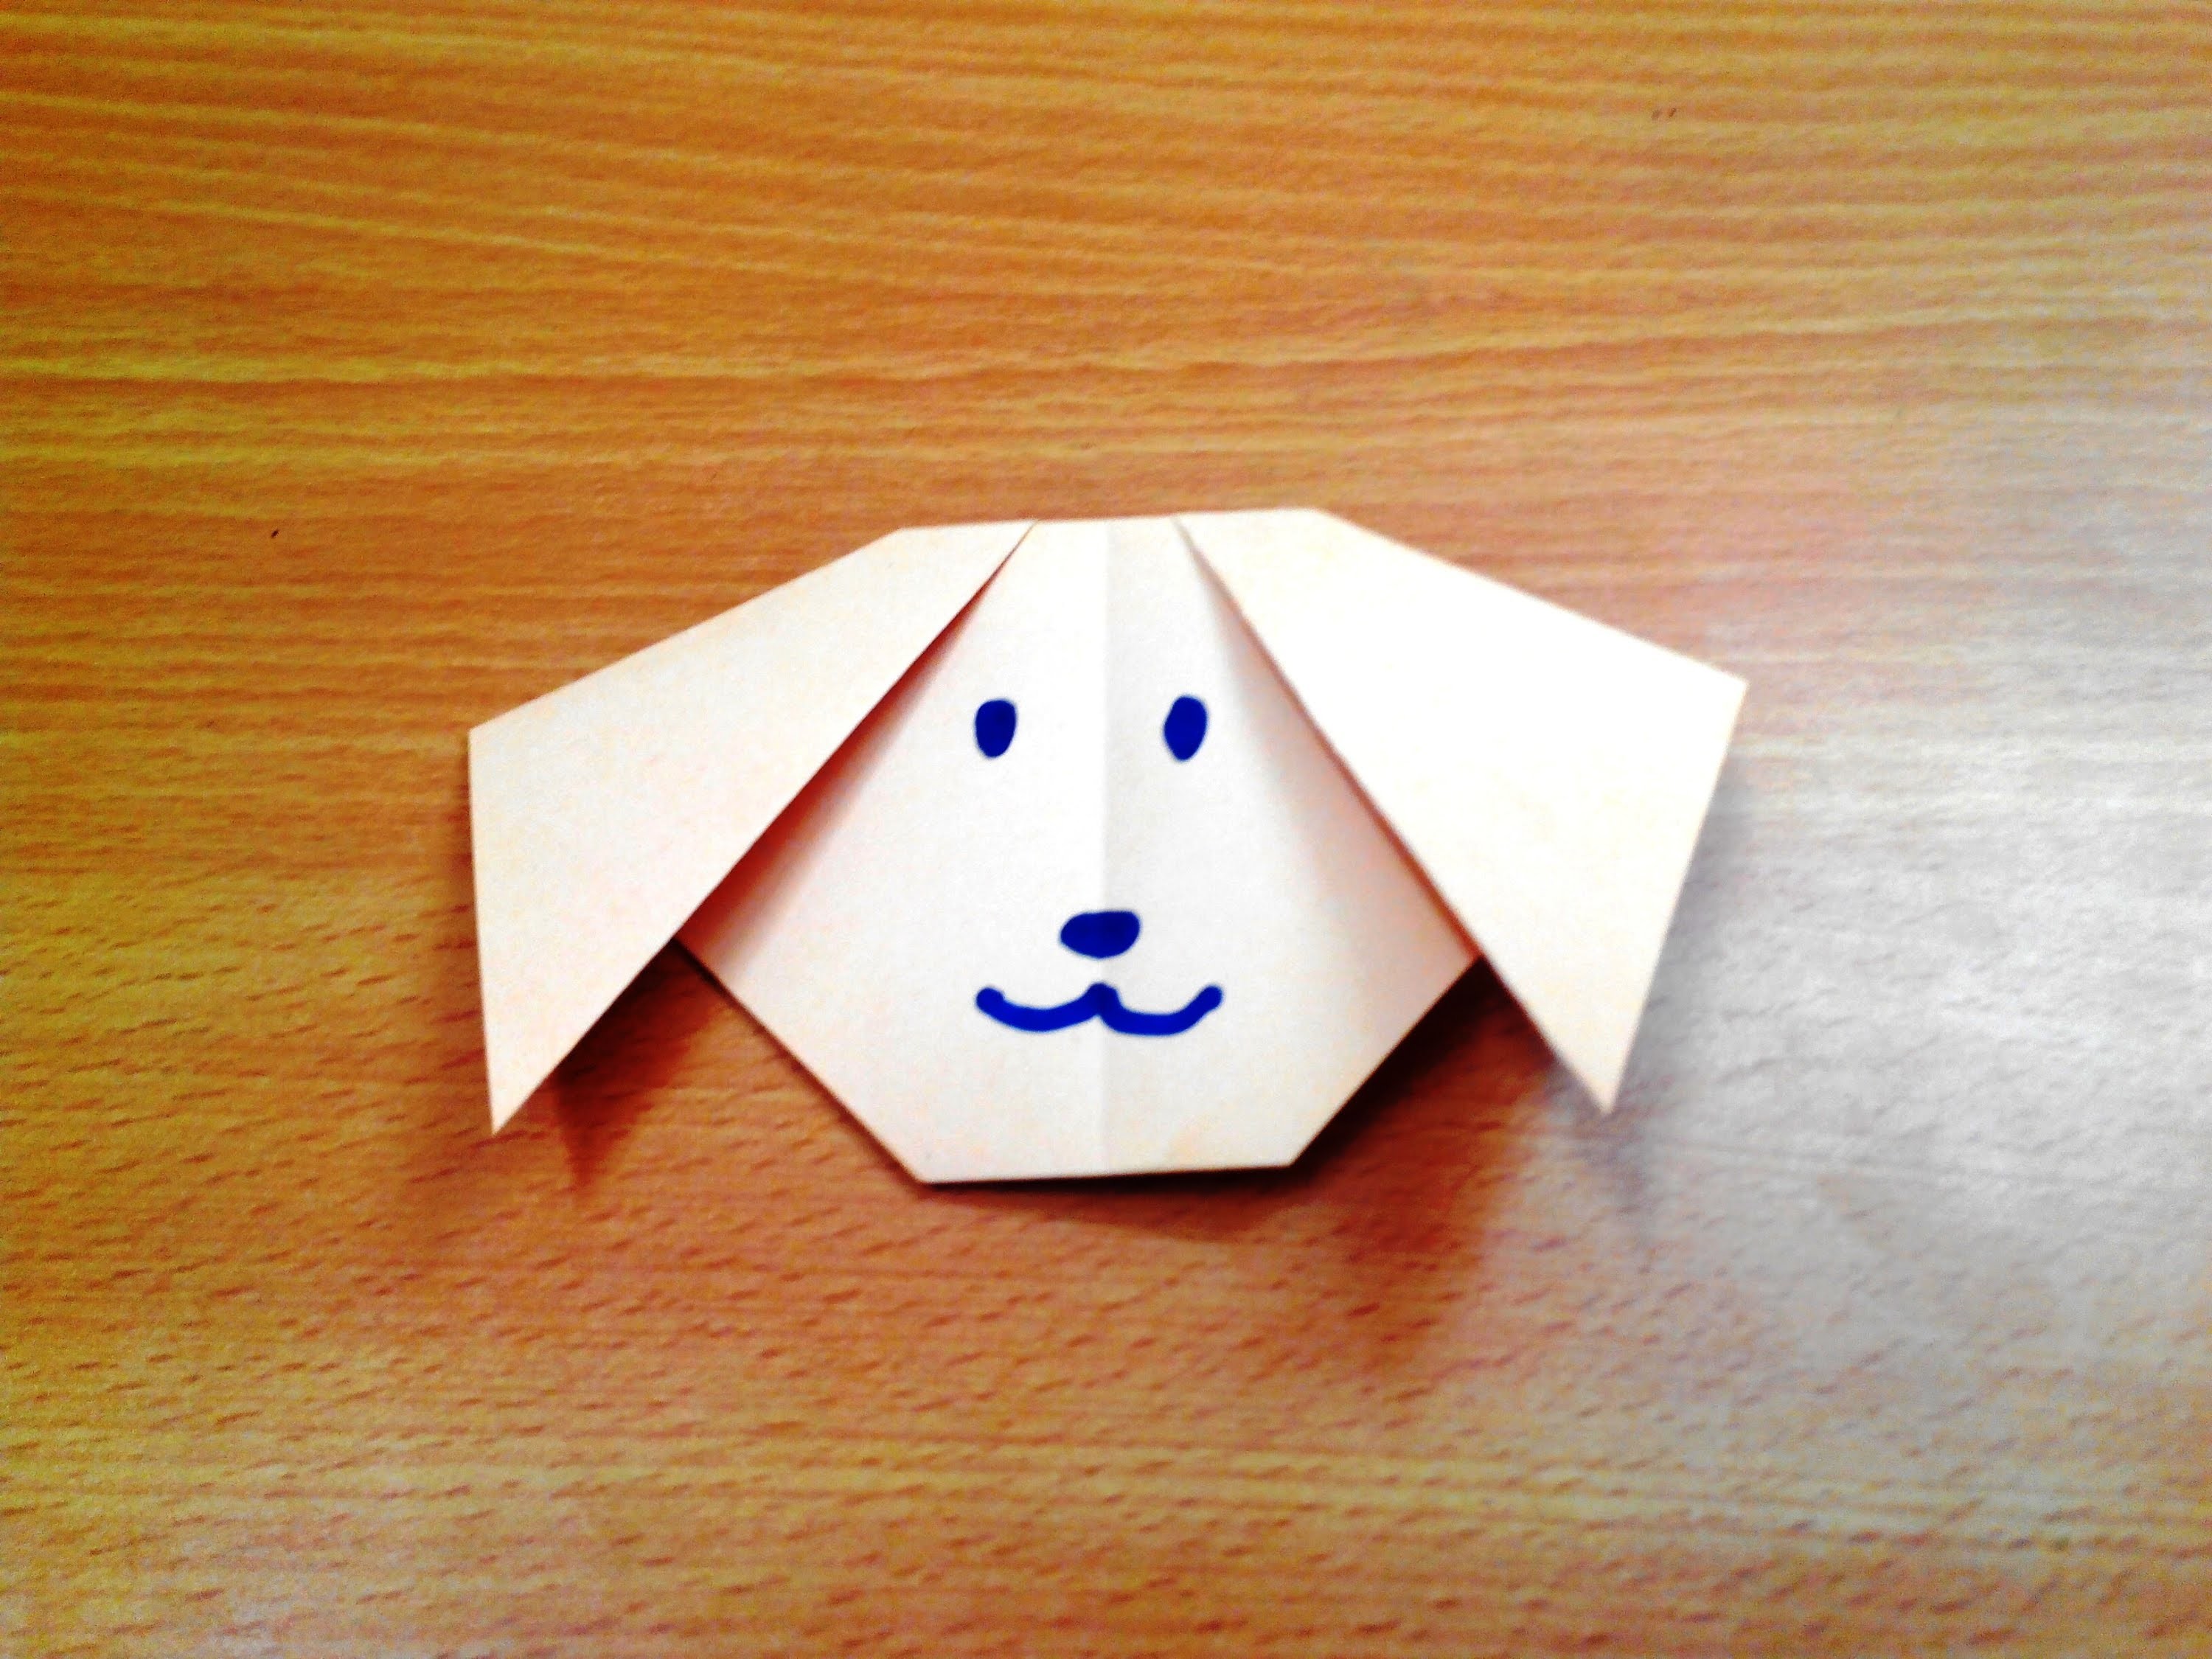 How to make an origami dog face step by step.